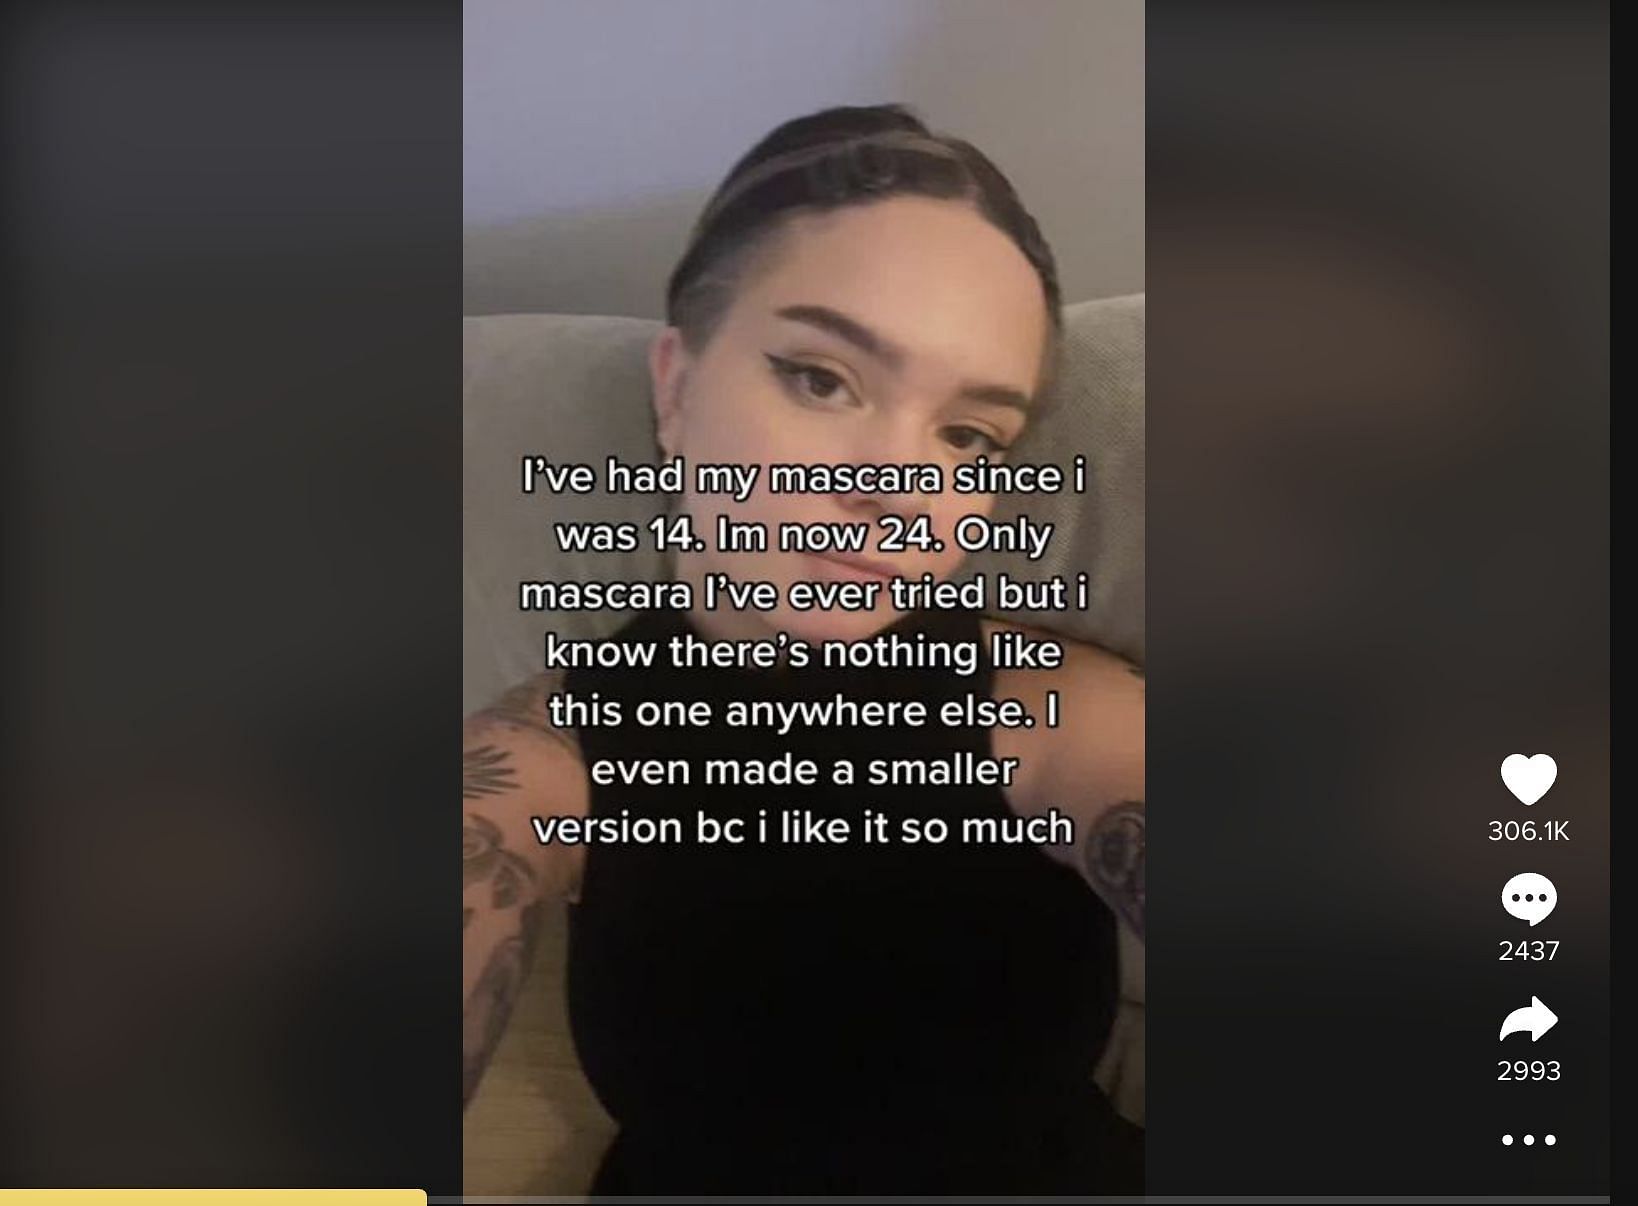 Many social media users hopped on to the &quot;mascara&quot; trend, and talked about their s*xual experiences by using the code word. (Image via TikTok)